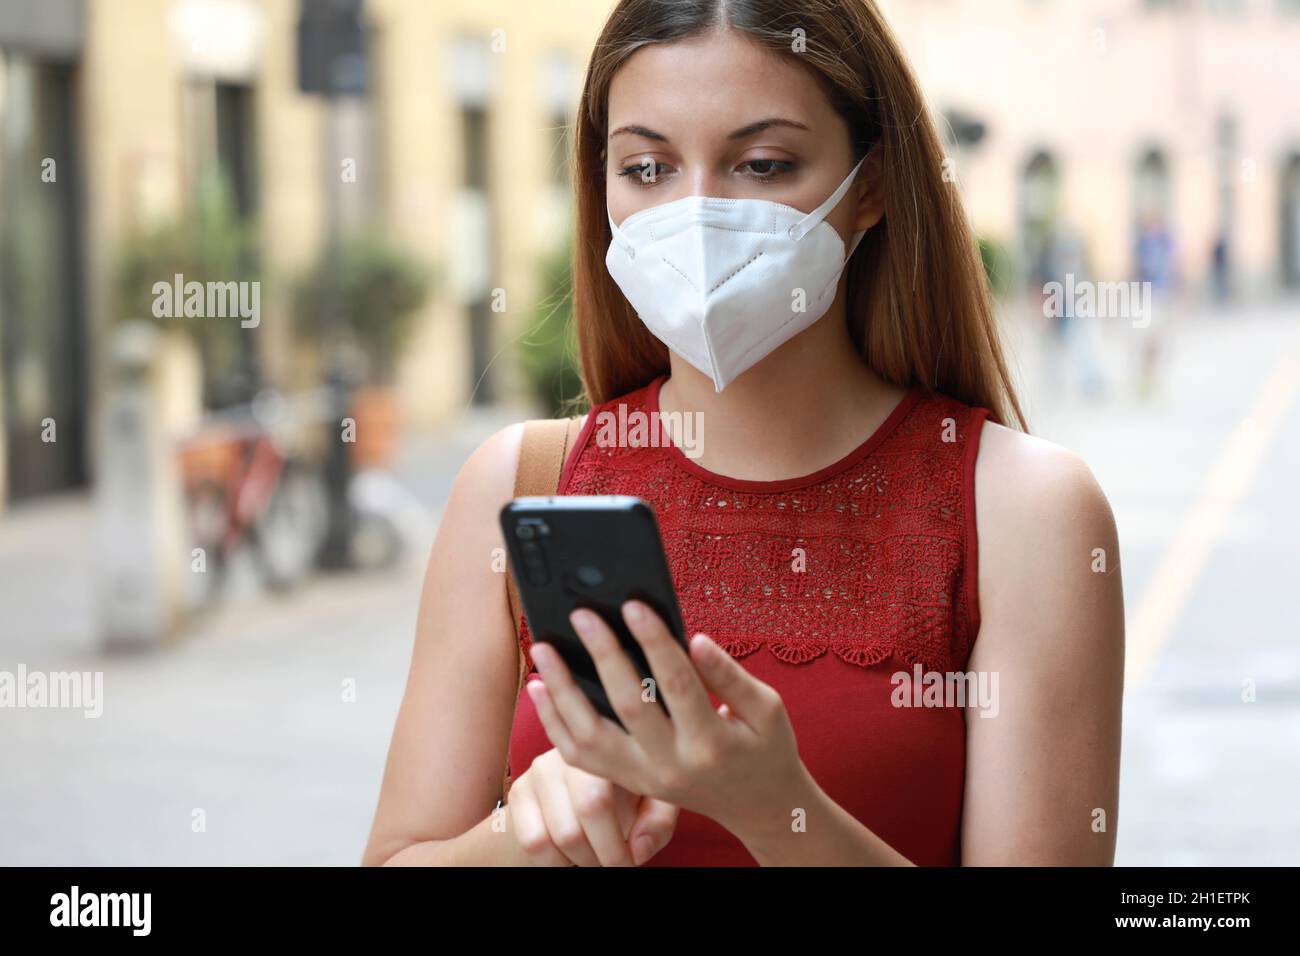 COVID-19 Portrait of Young Woman Wearing KN95 FFP2 Mask Using Smart Phone App in City Street to Aid Contact Tracing and Self Diagnostic in Response to Stock Photo